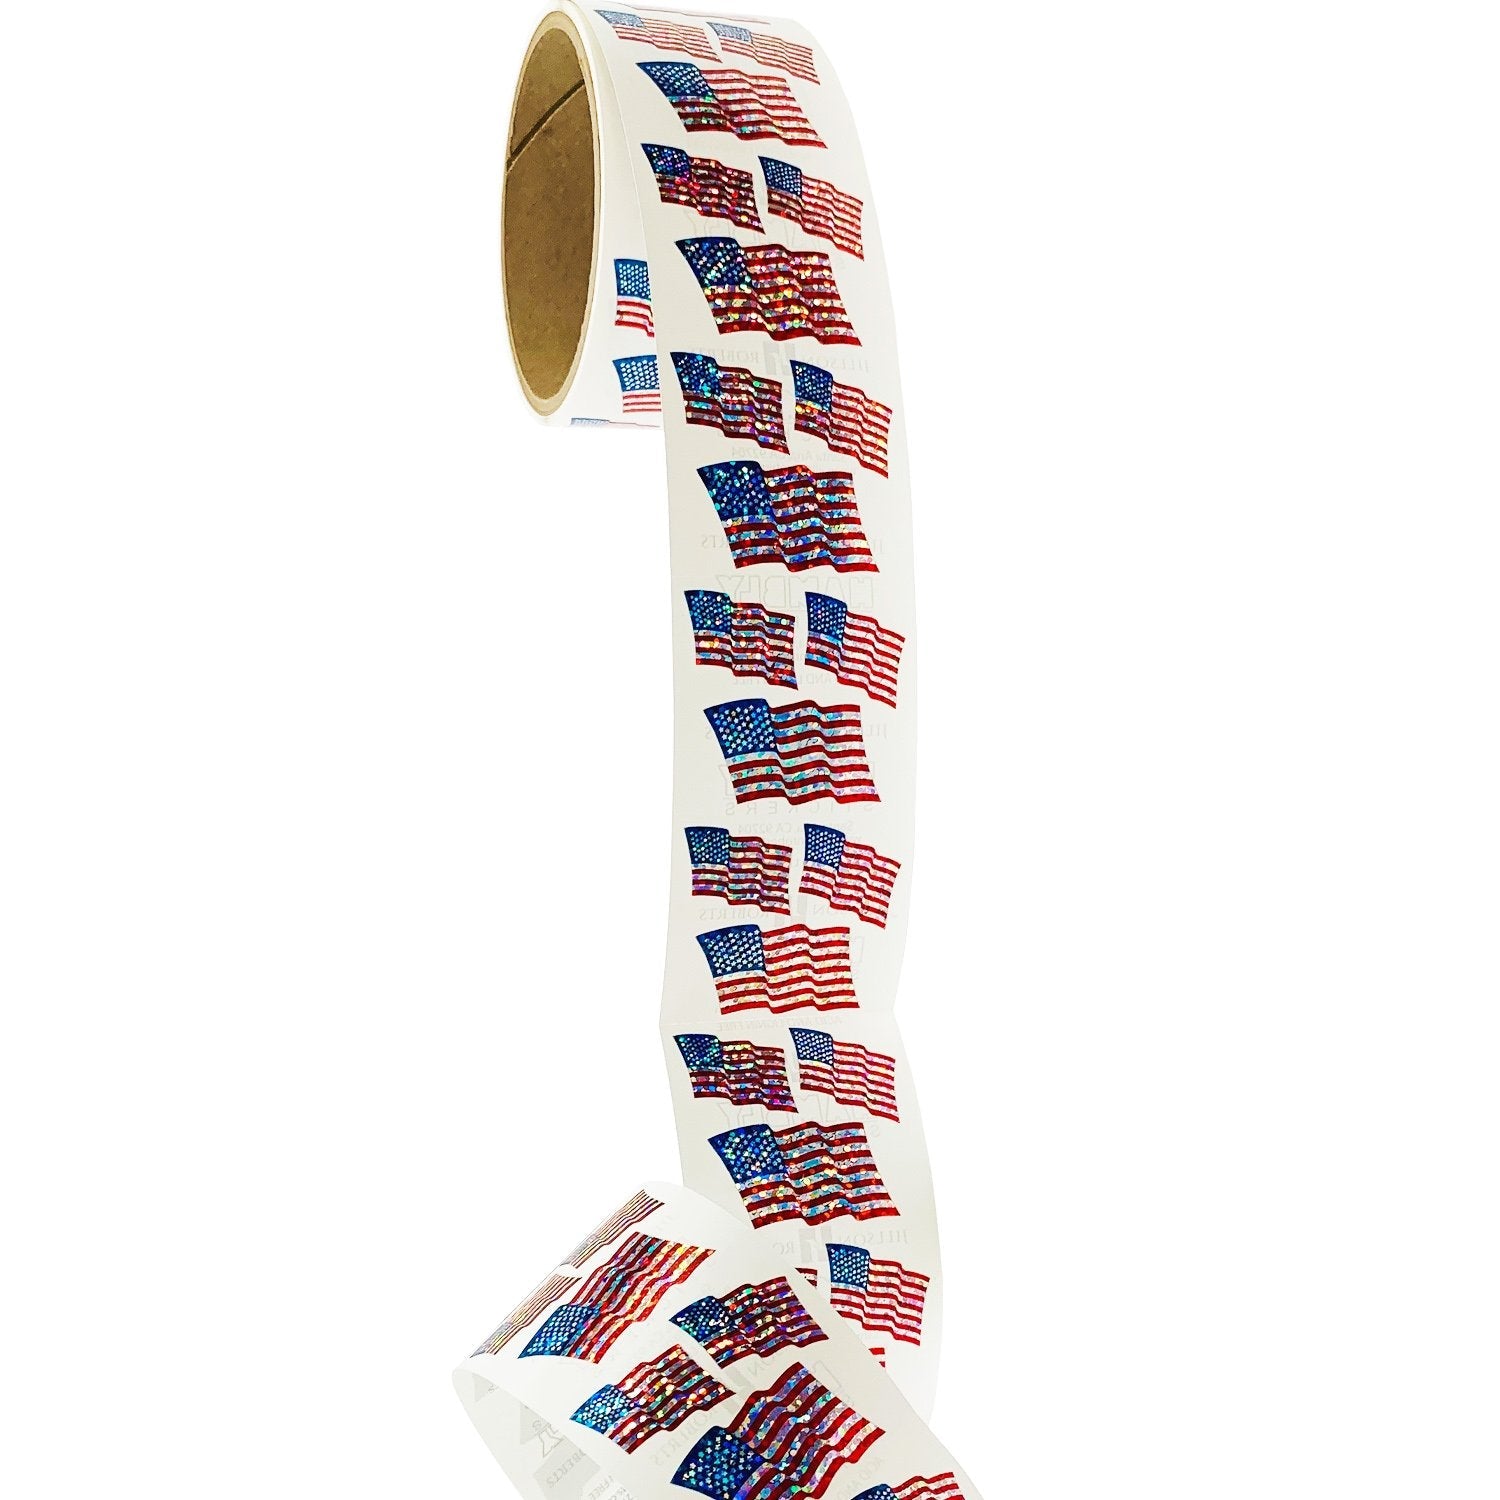 Bulk Roll Prismatic Stickers, American Flags (100 Repeats)